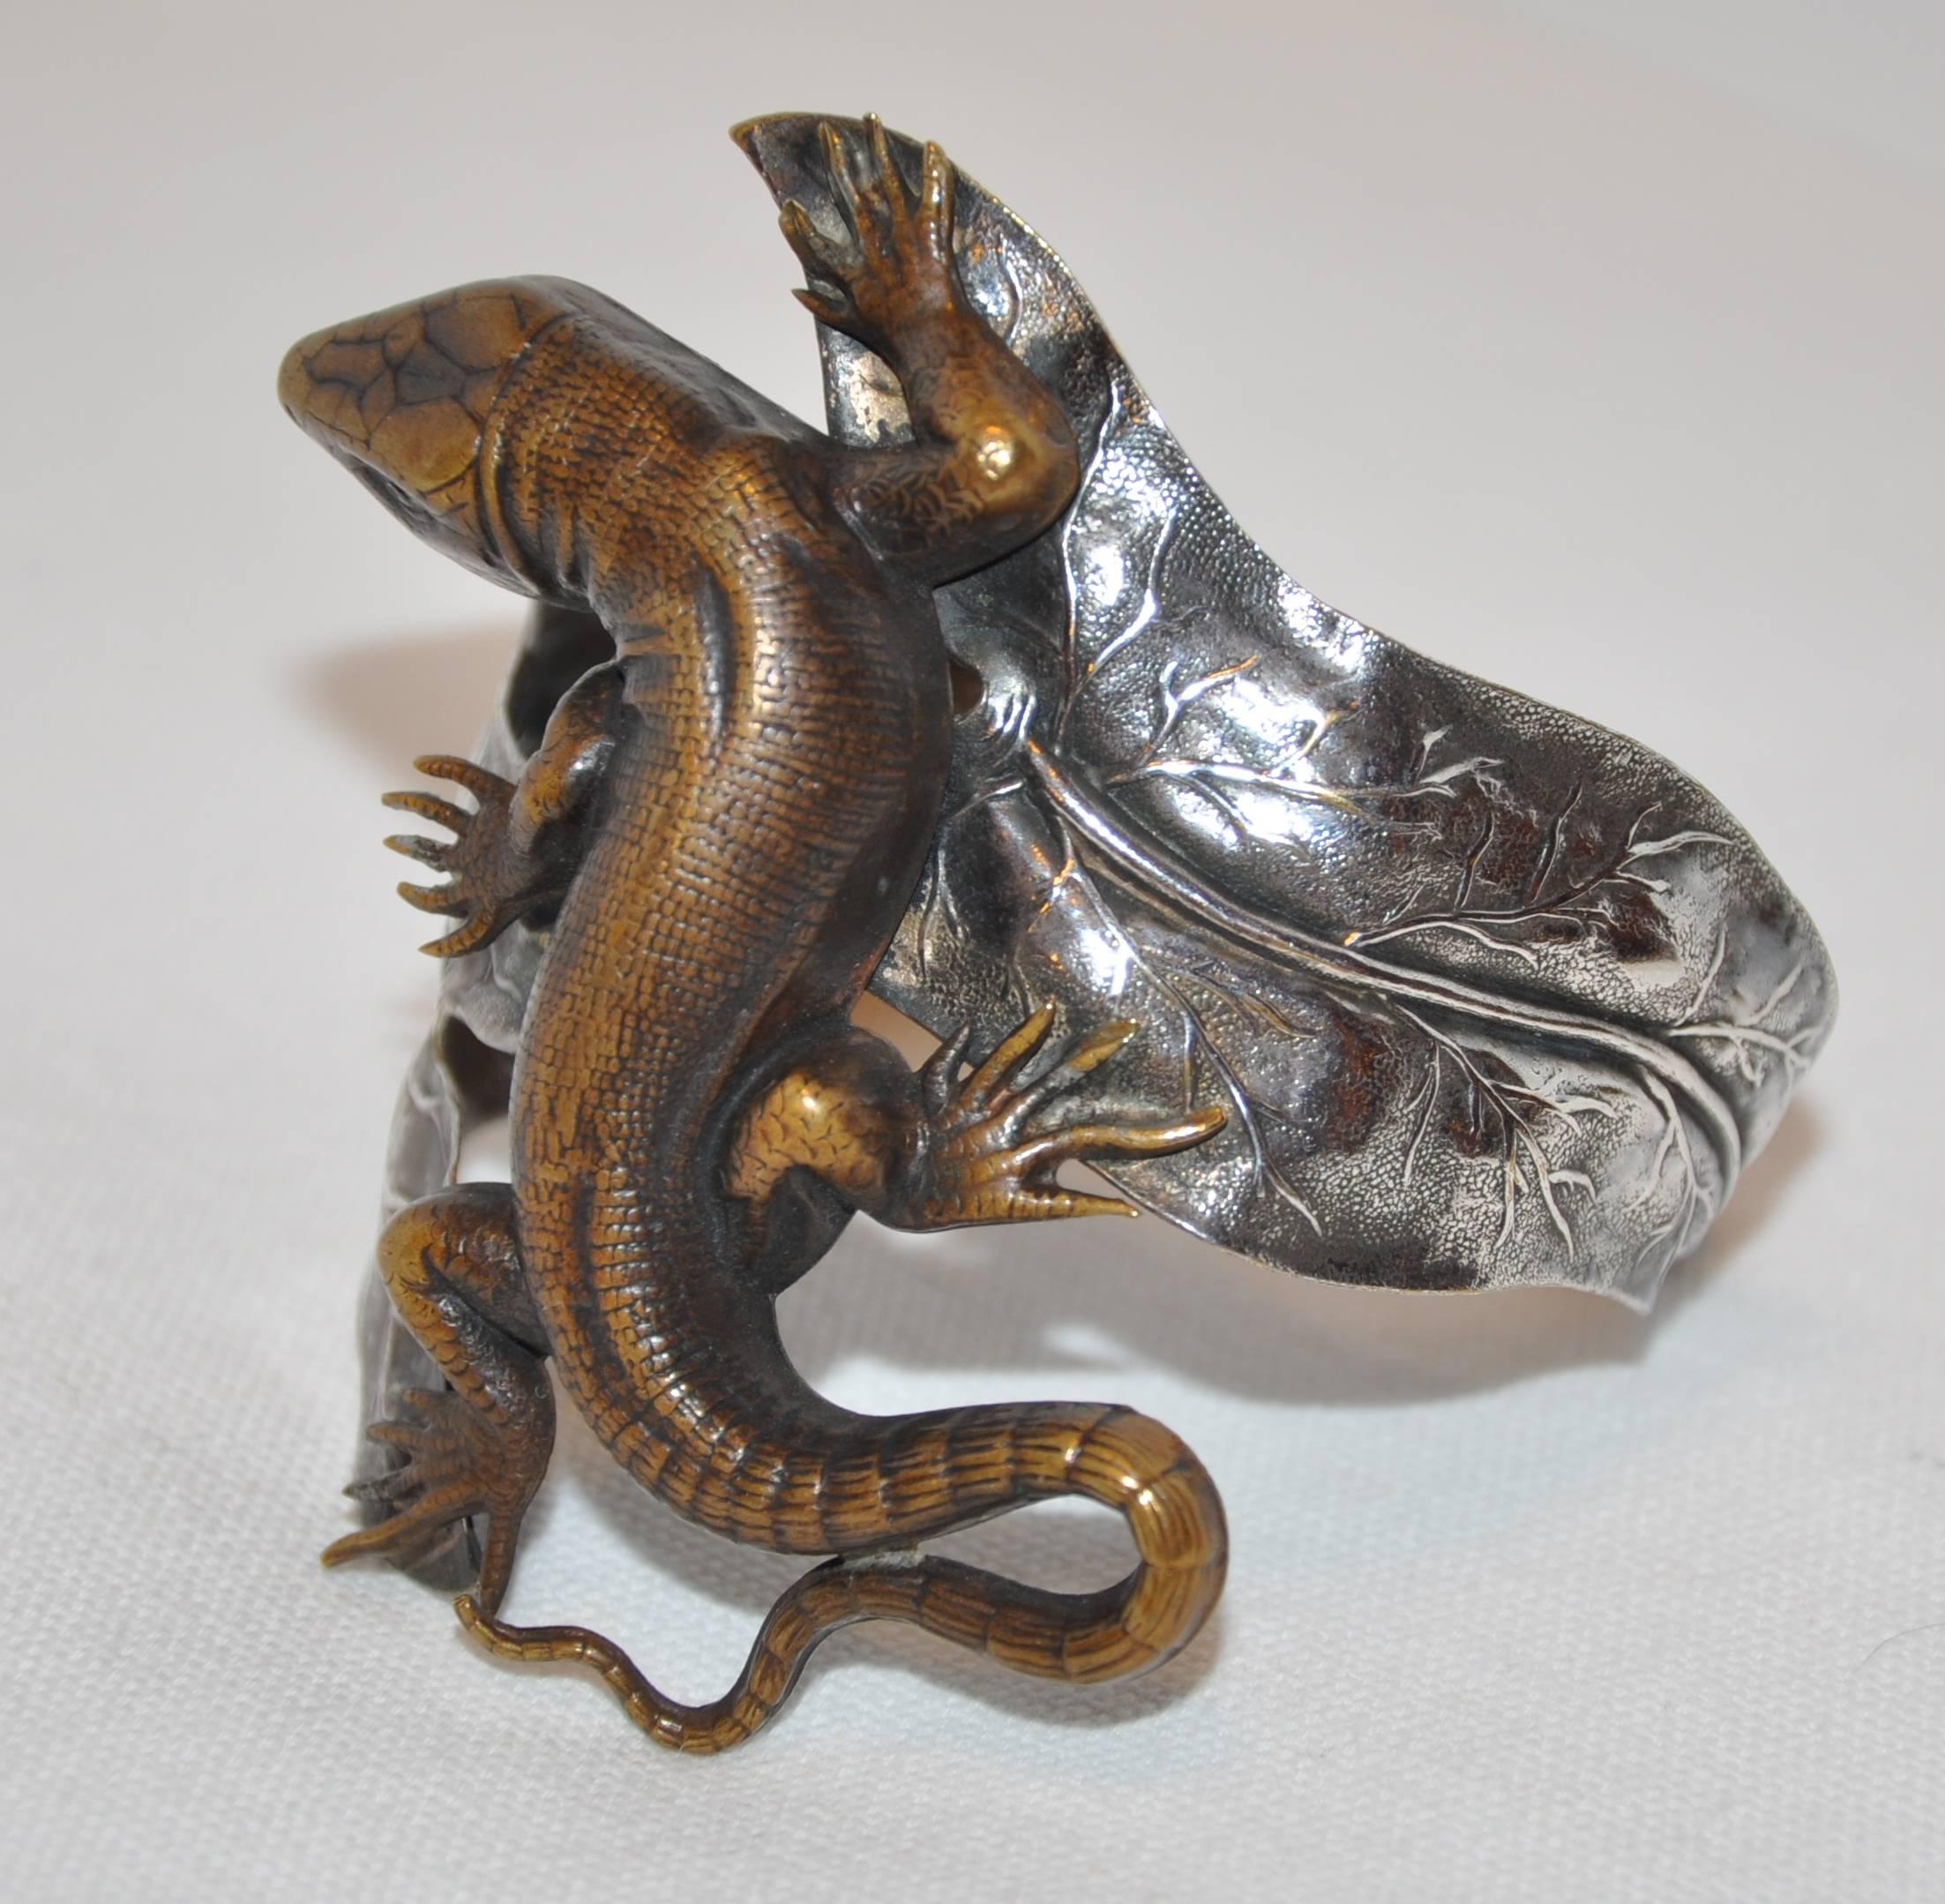        This wonderfully detailed form-fitting adjustable cuff bracelet of a combination of hammered and etched silver is highlighted with a whimsical etched bronze lizard which appears to wrap around the wrist when the adjustable cuff bracelet is